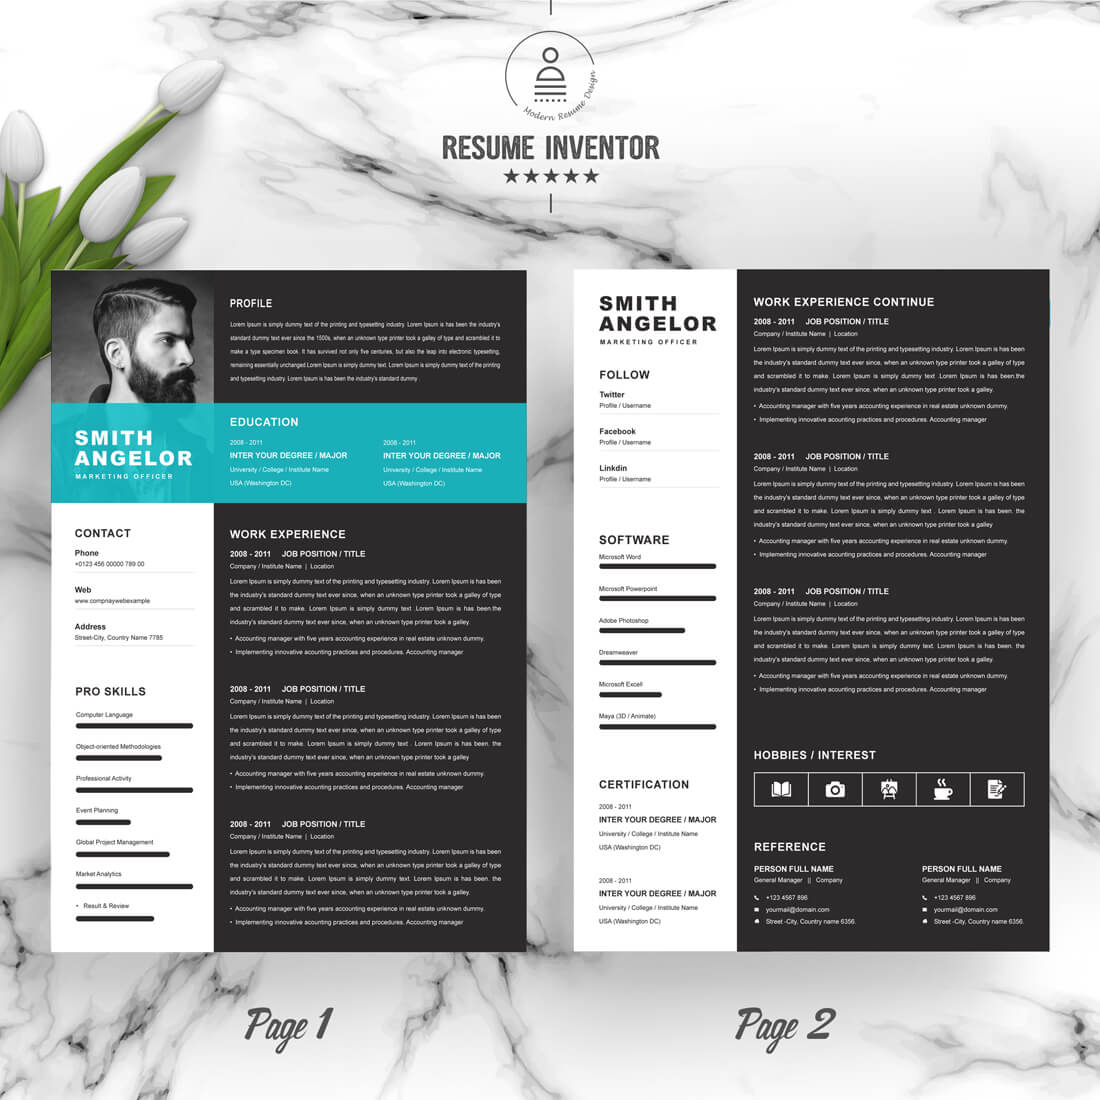 Marketing Officer Resume Template cover image.